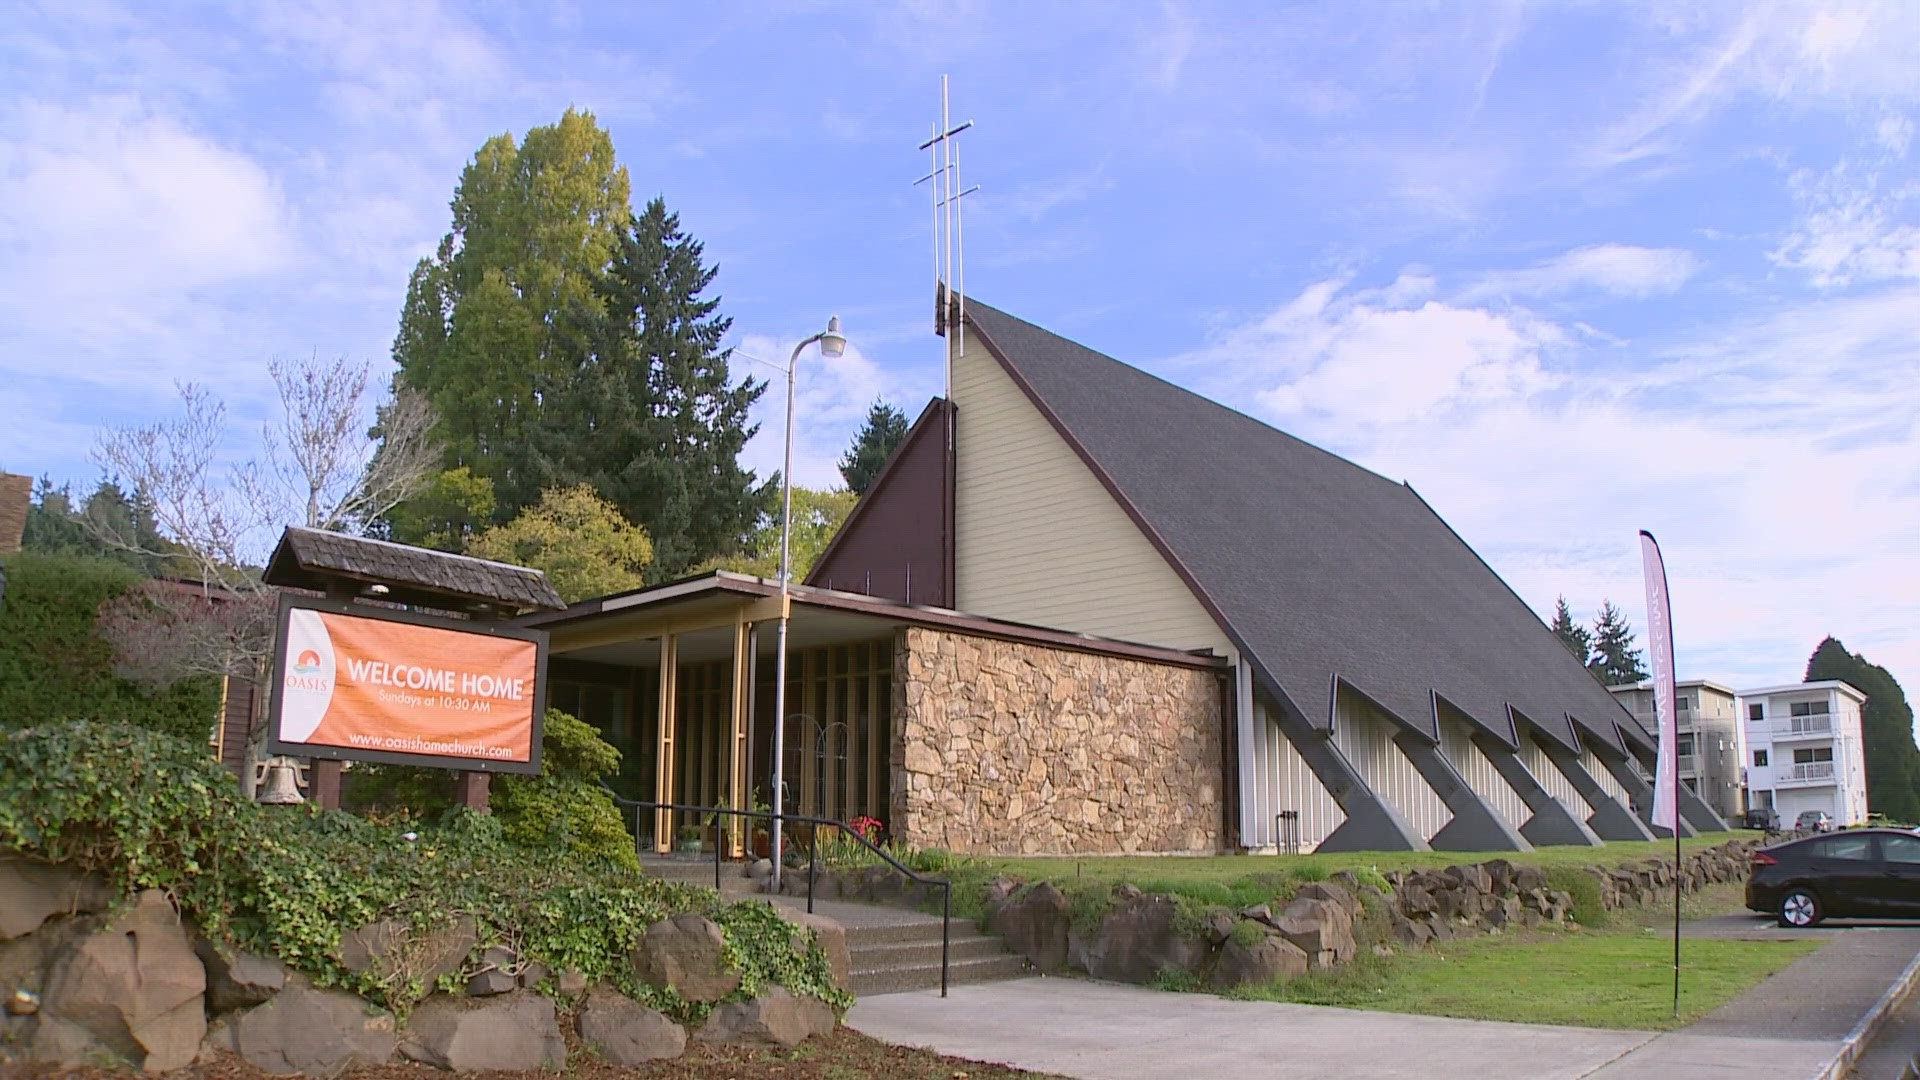 Church staff said the parking lot could host homeless campers as soon as next week.